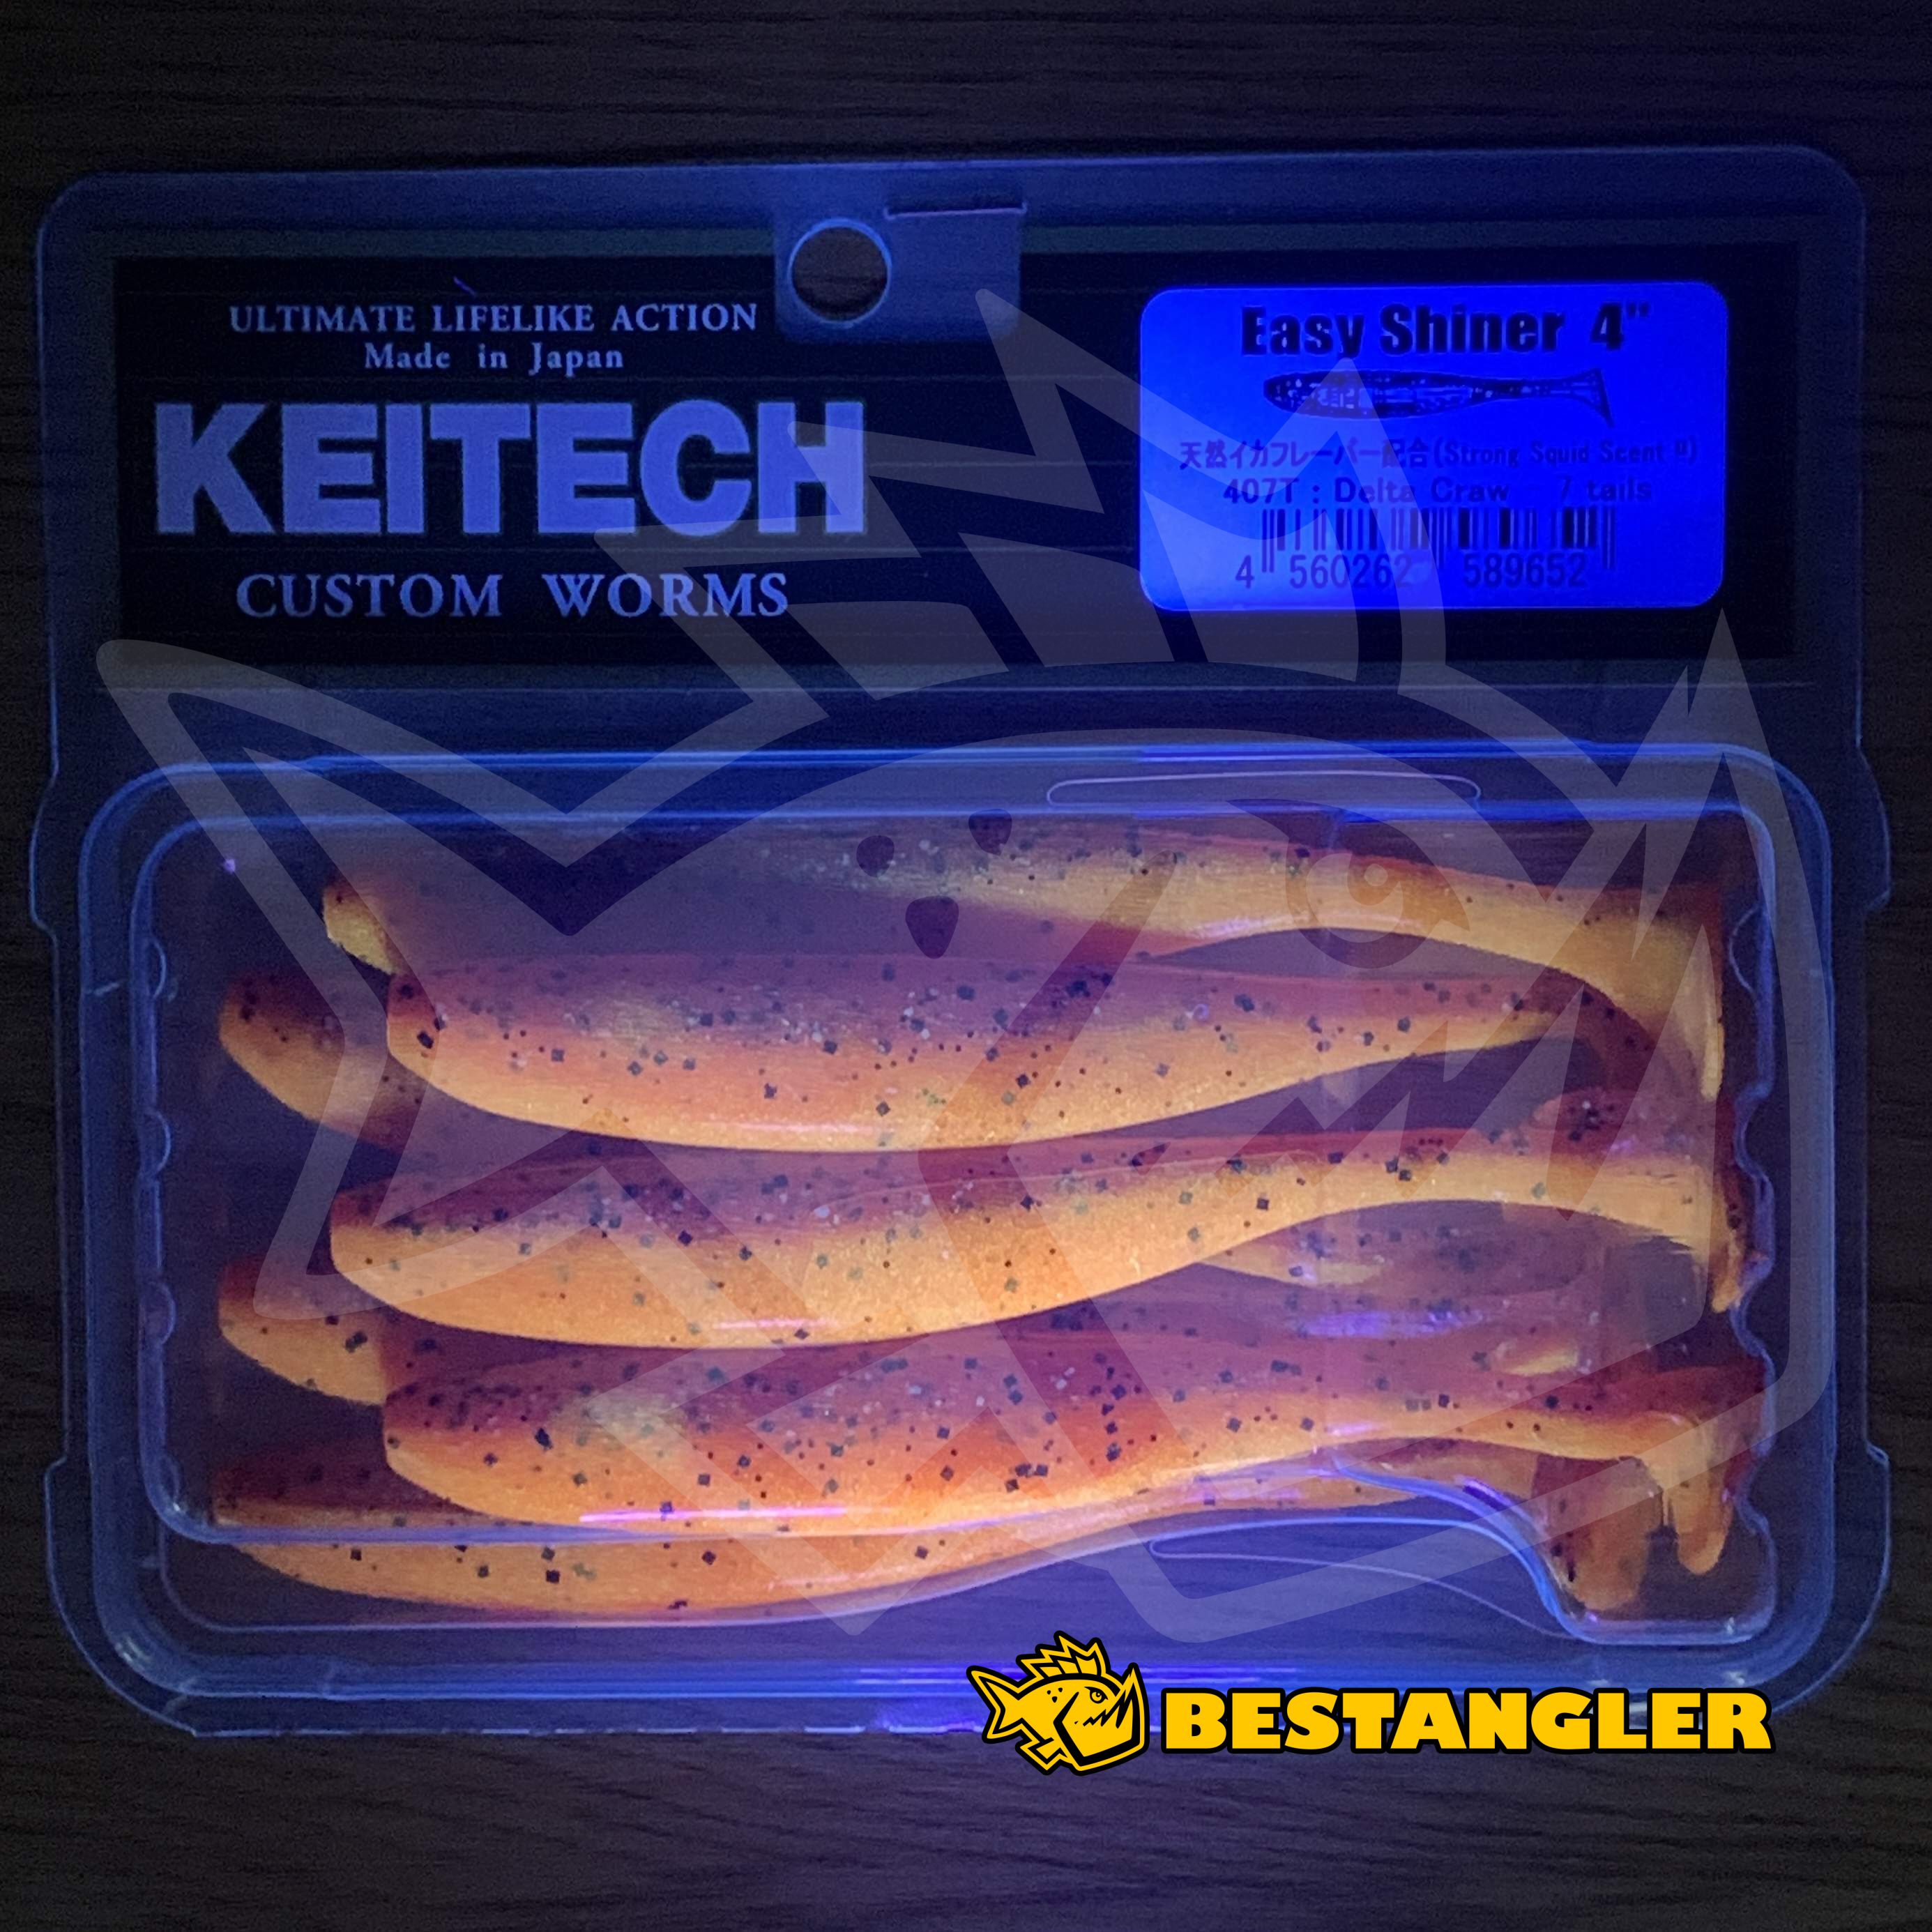 BESTANGLER.com - We received a large delivery of KEITECH soft